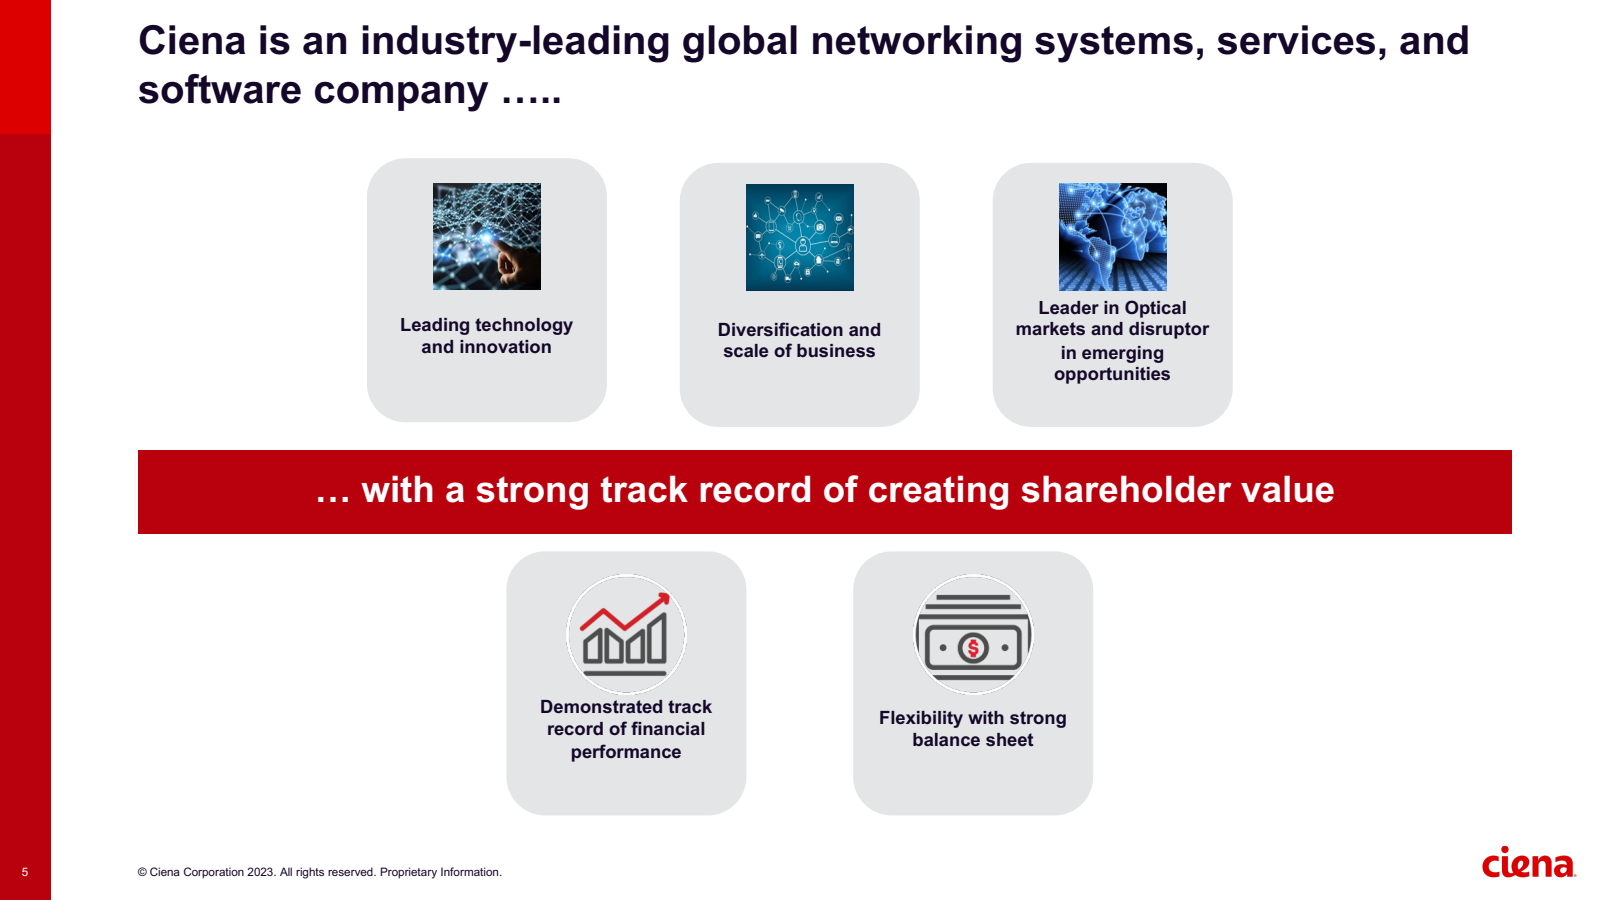 Ciena is an industry